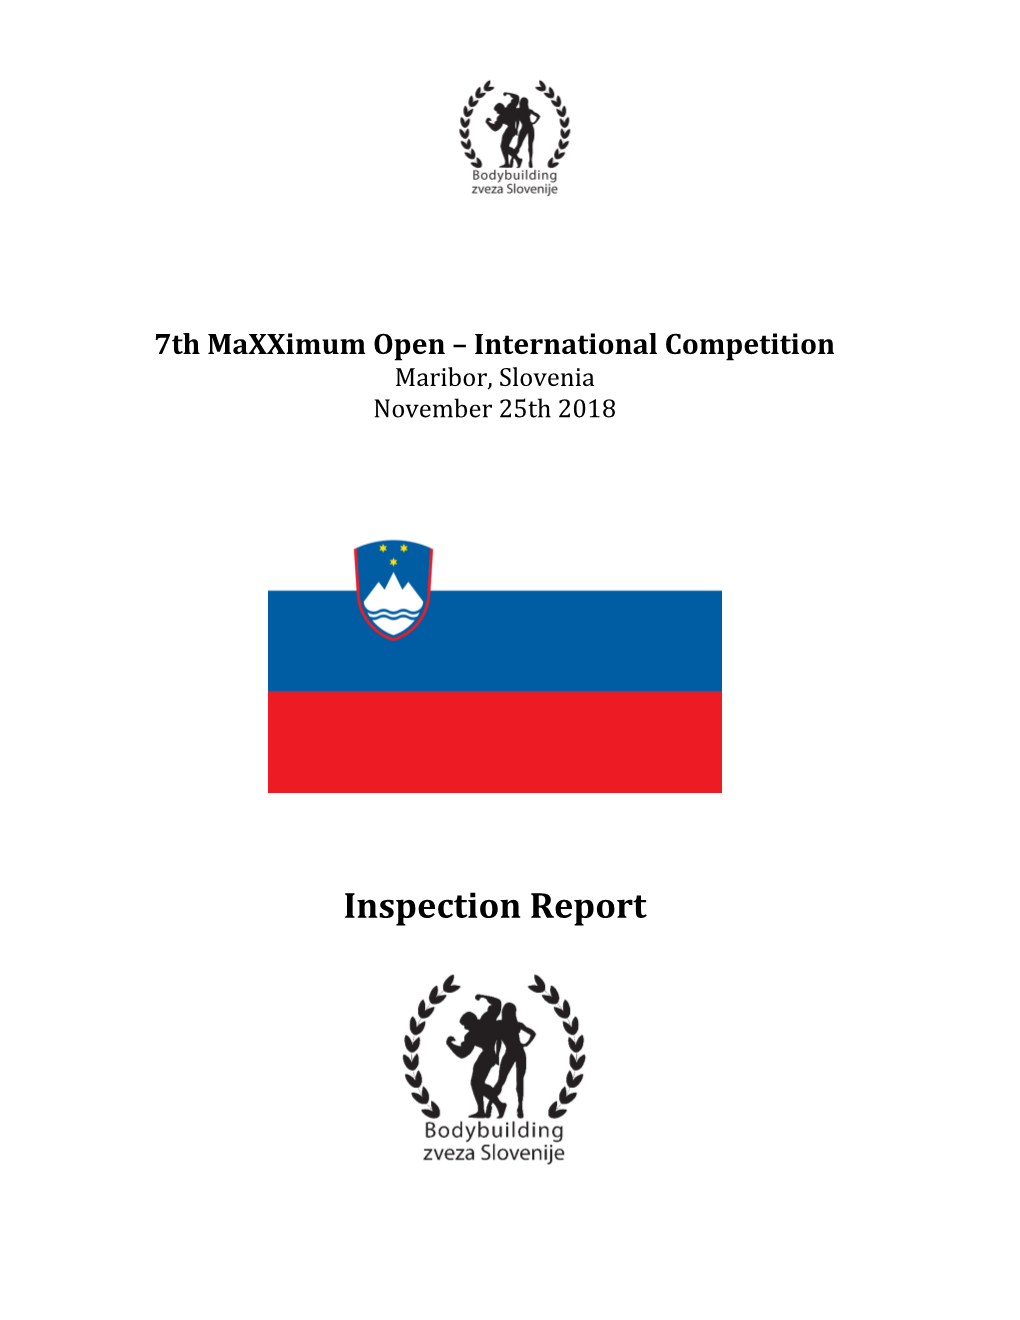 Inspection Report Introduction